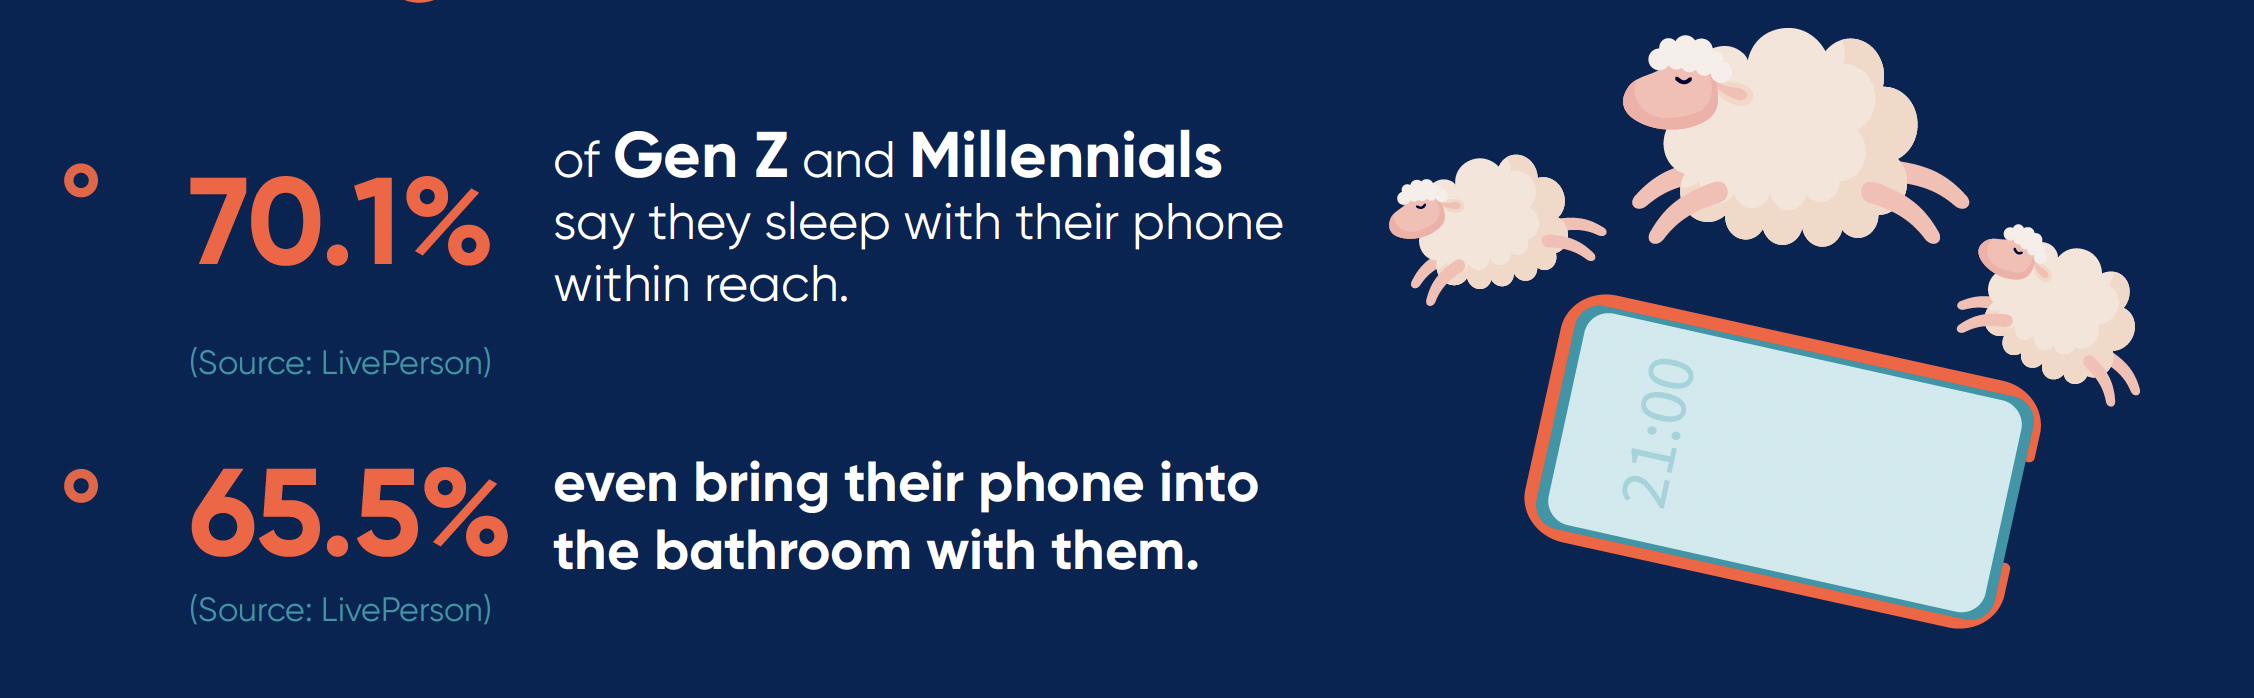 70.1% of Gen Z and Millennials say they sleep with their phone within reach. 65.5% even bring their phone into the bathroom with them.